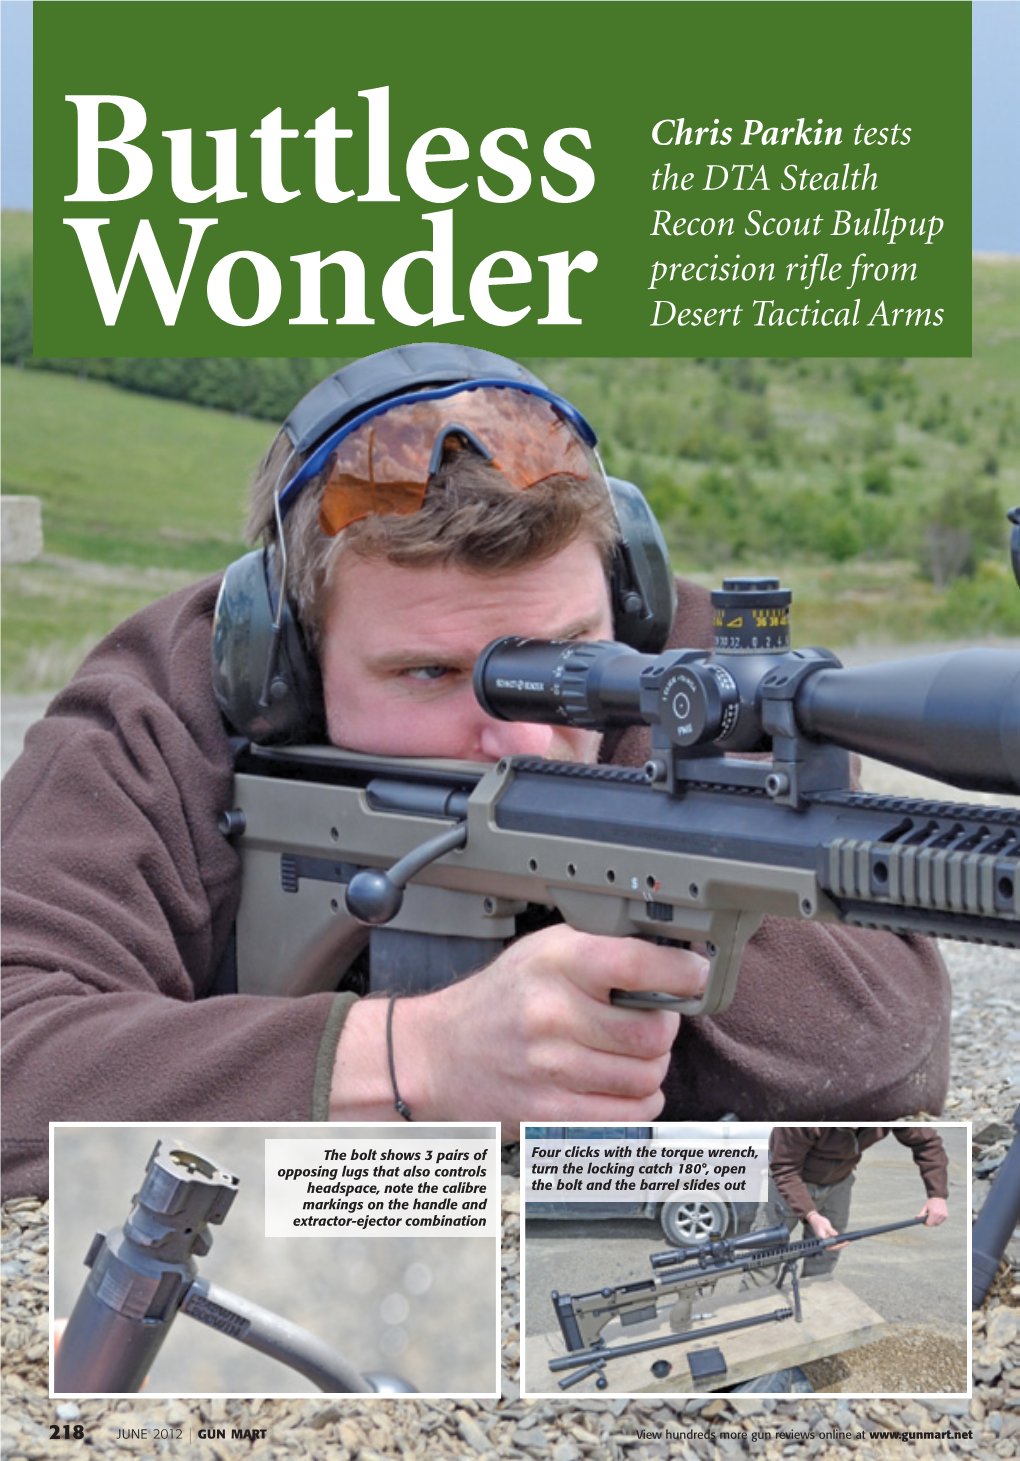 Chris Parkin Tests the DTA Stealth Recon Scout Bullpup